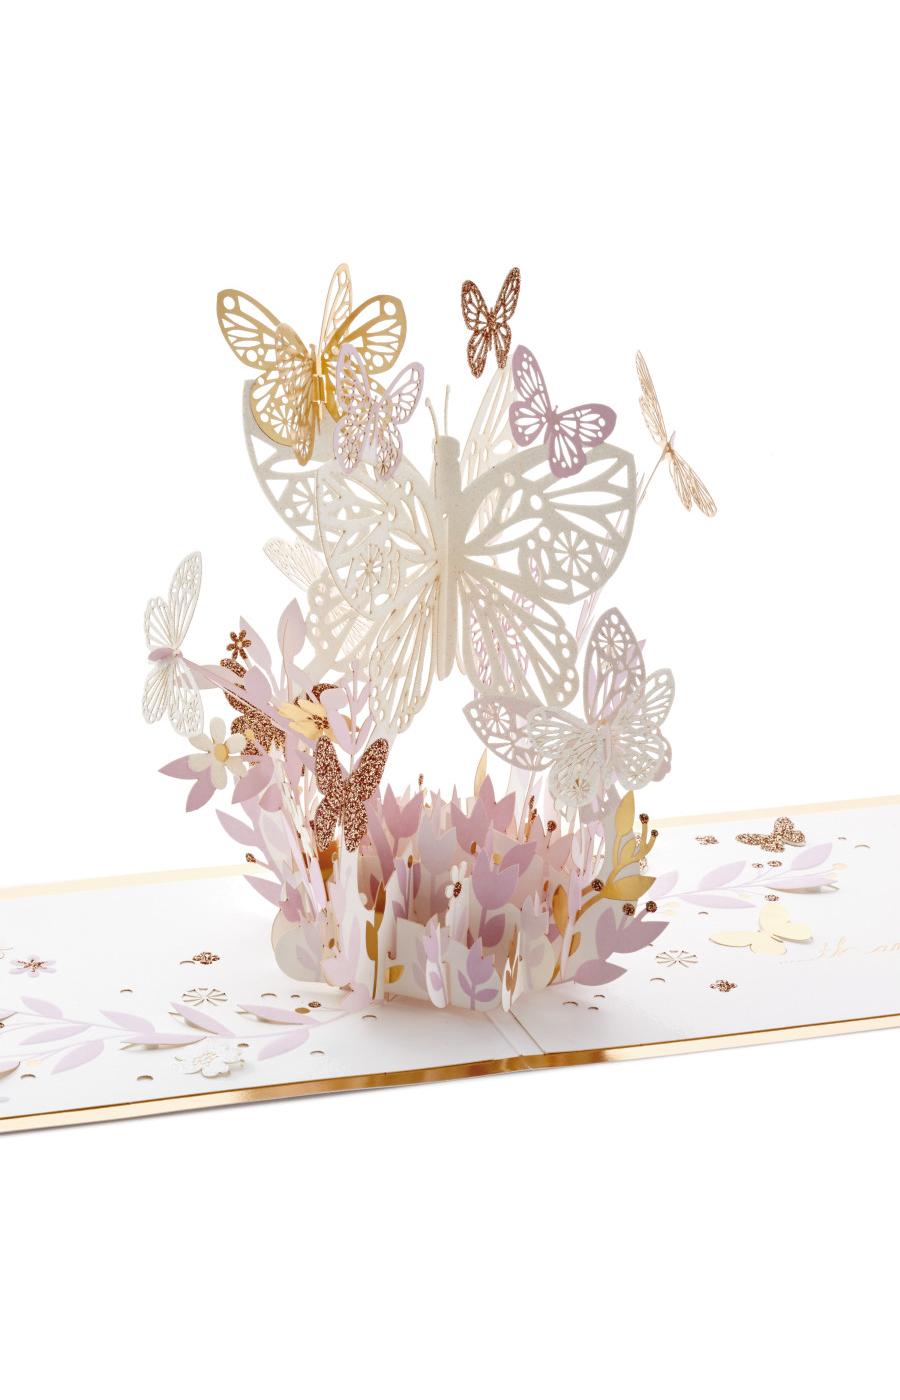 Hallmark Signature Thankful for You Pop-Up 3D Thinking of You Card - E48; image 5 of 7